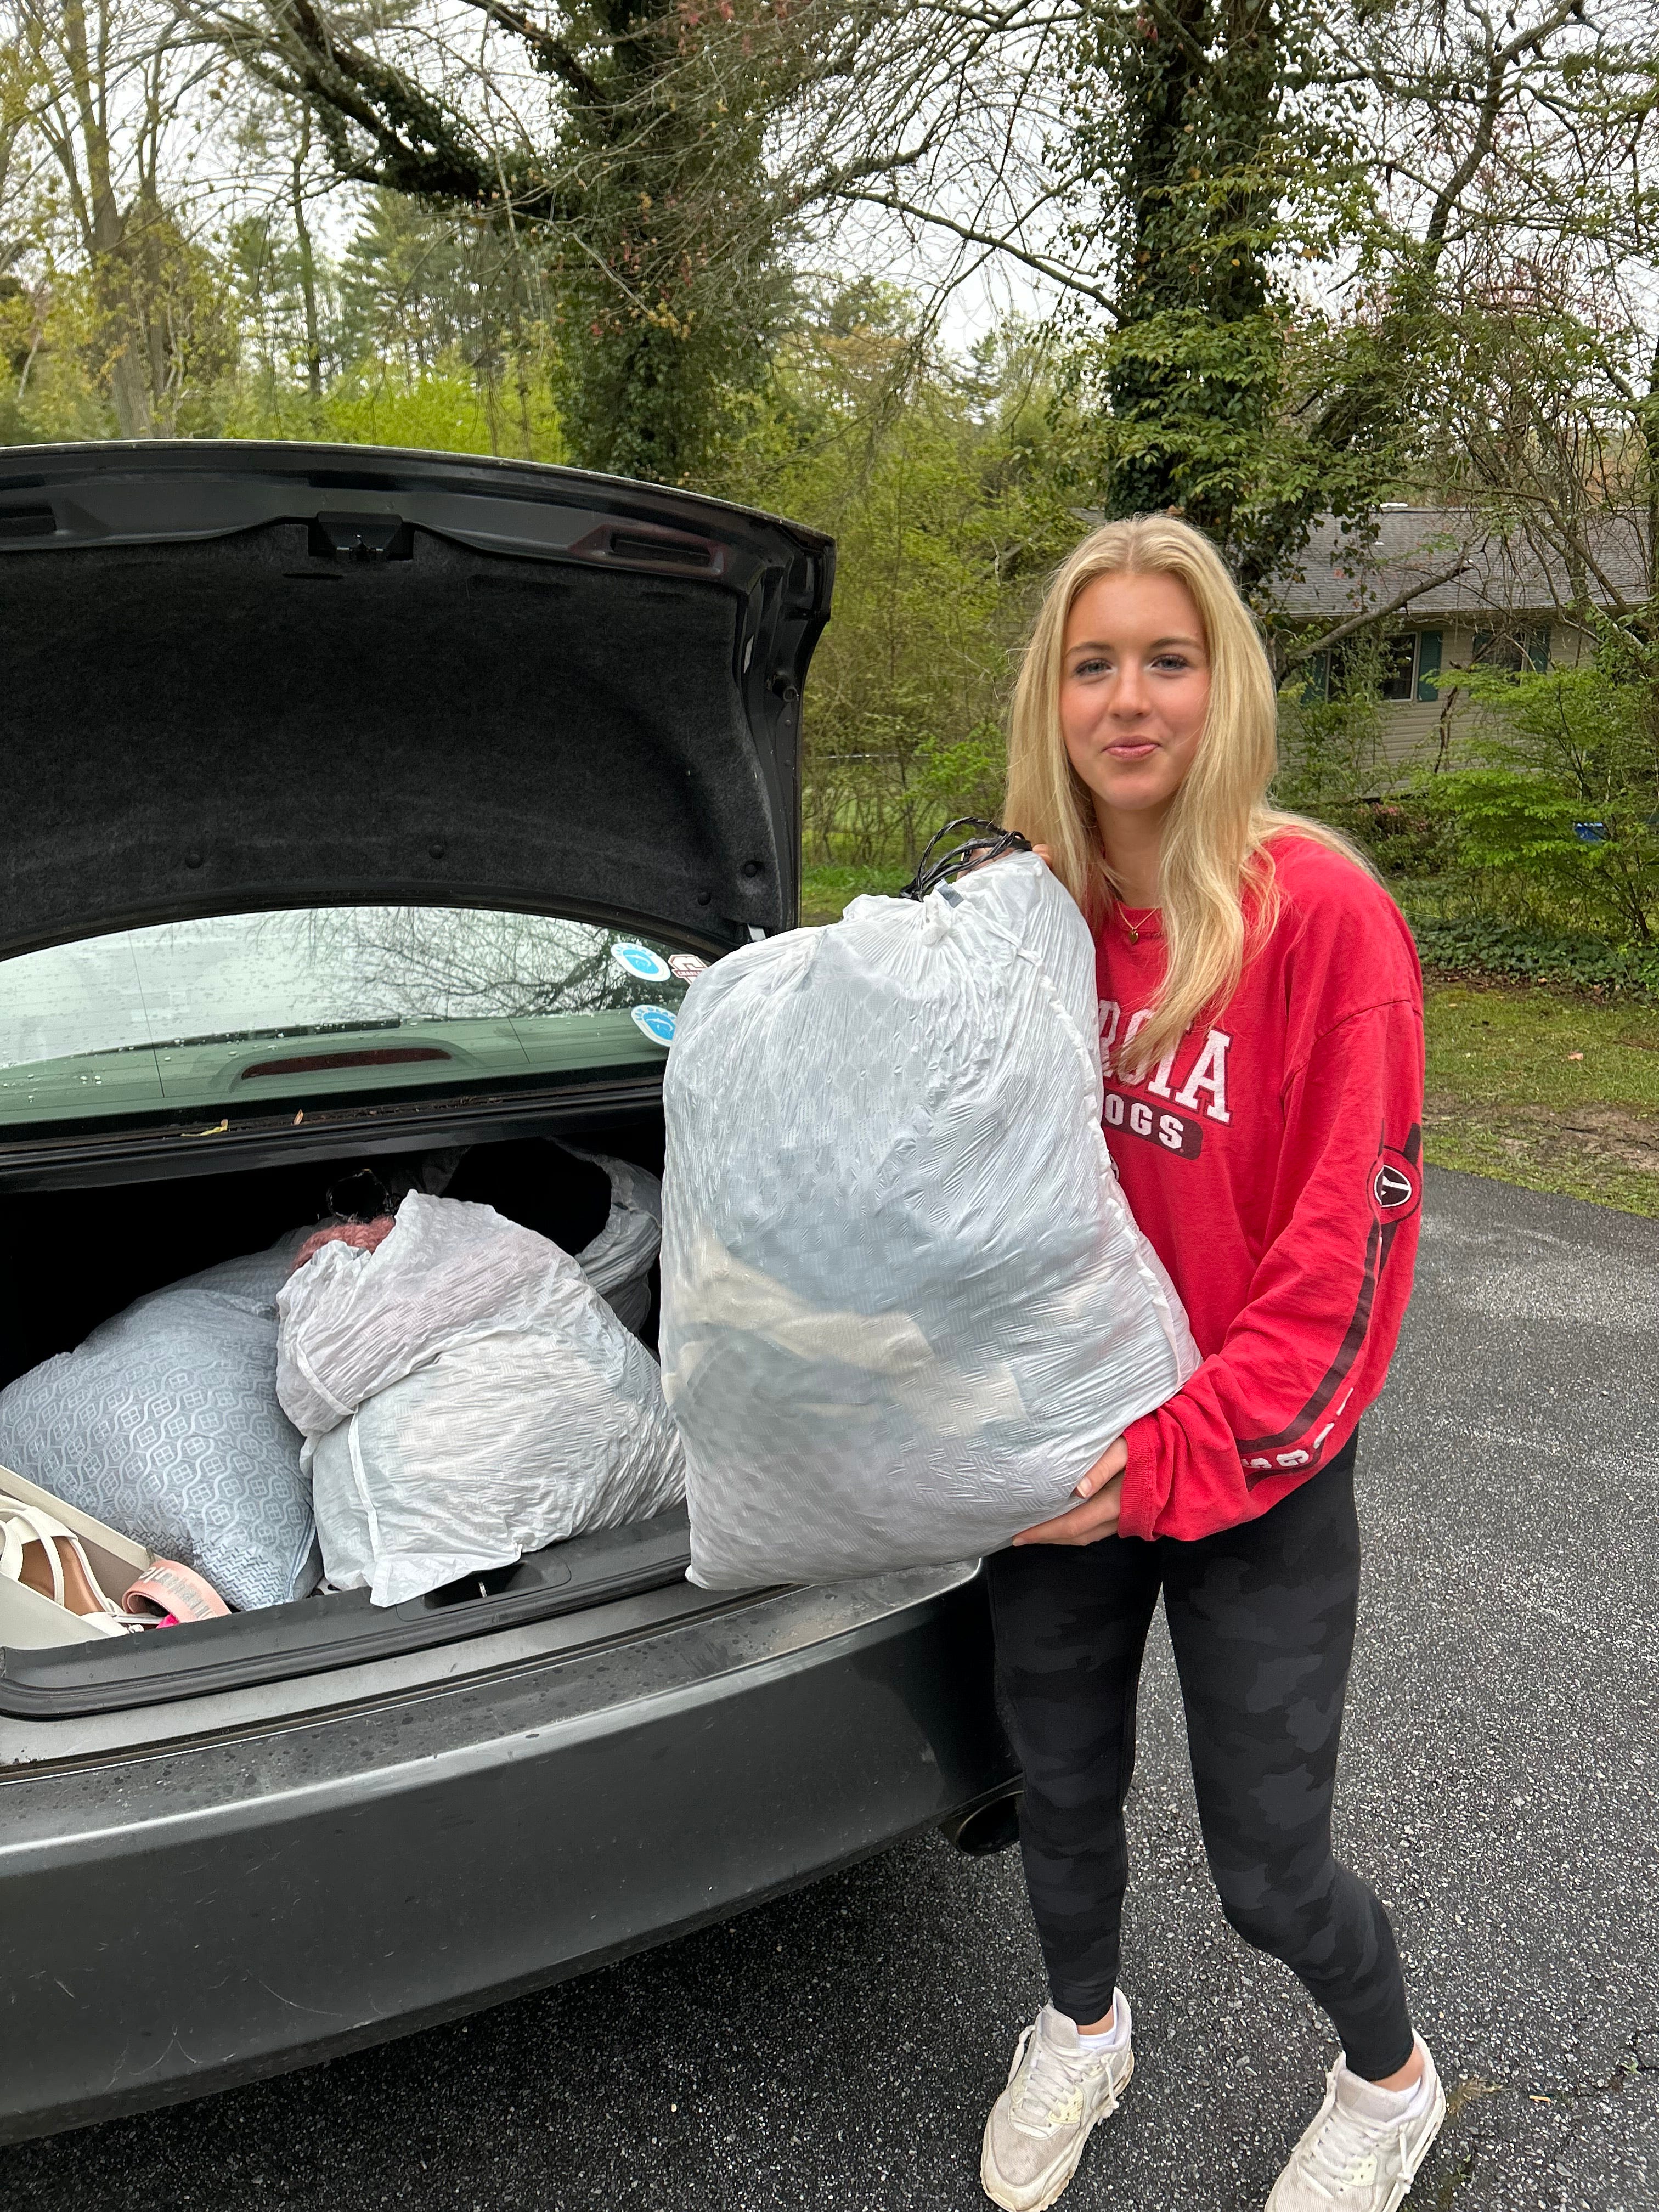 Black Mountain resident Eva Schneider collected more than 375 pounds of clothes to be donated to local organizations.